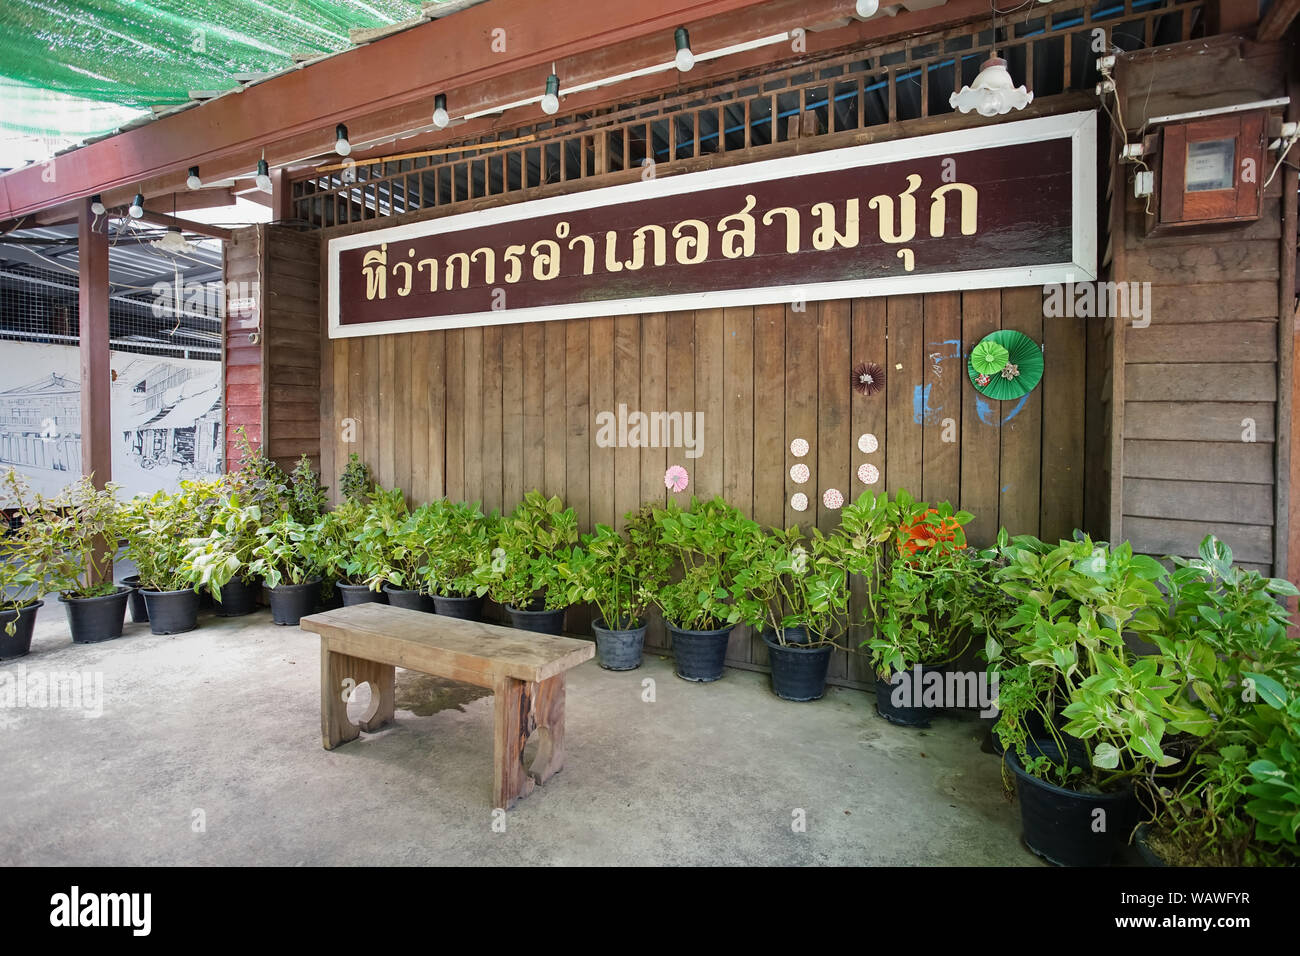 Suphan Buri, Thailand - May 24, 2019: The famous travel destination Sam Chuk old market with Thai nameplate means Sam Chuk District. Stock Photo